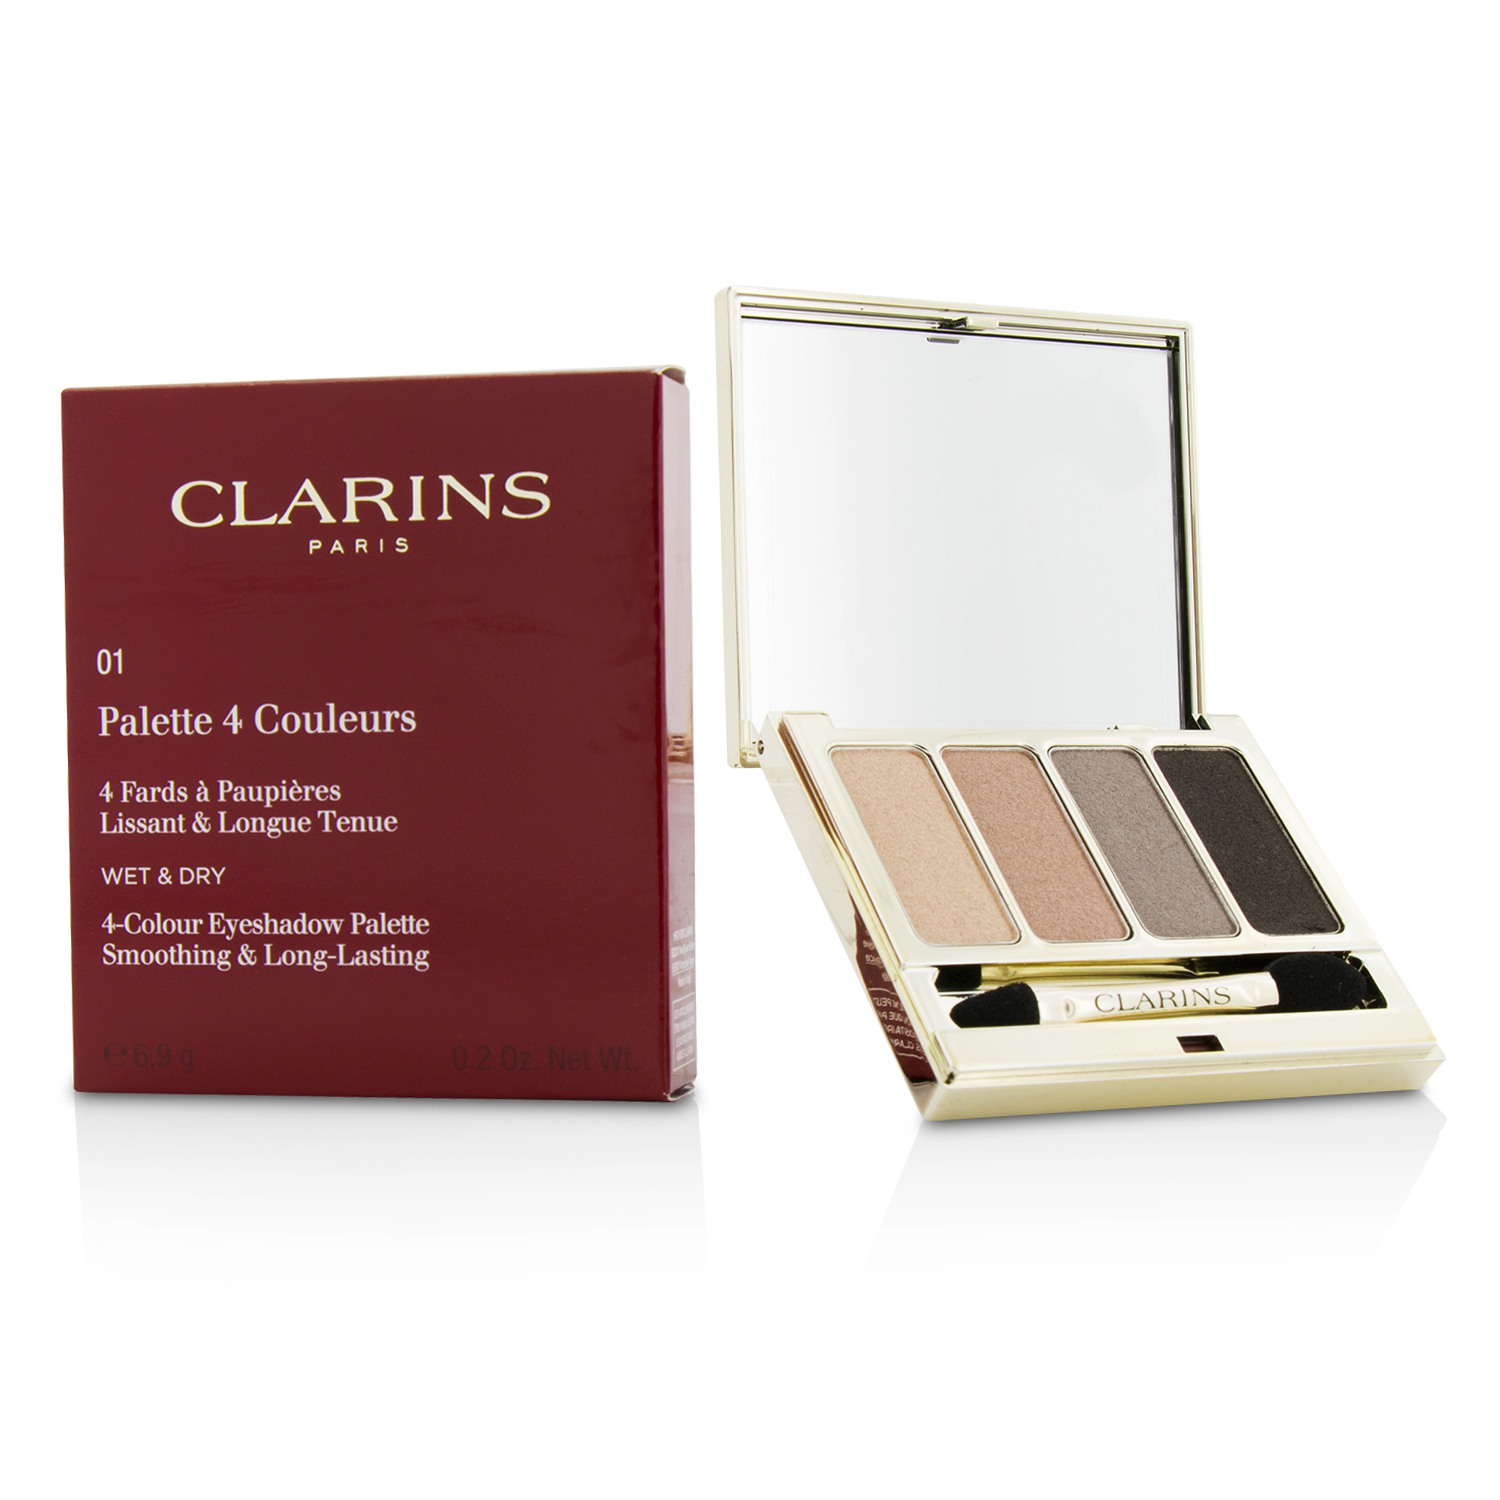 4 Colour Eyeshadow Palette (Smoothing & Long Lasting) - #01 Nude Clarins Image